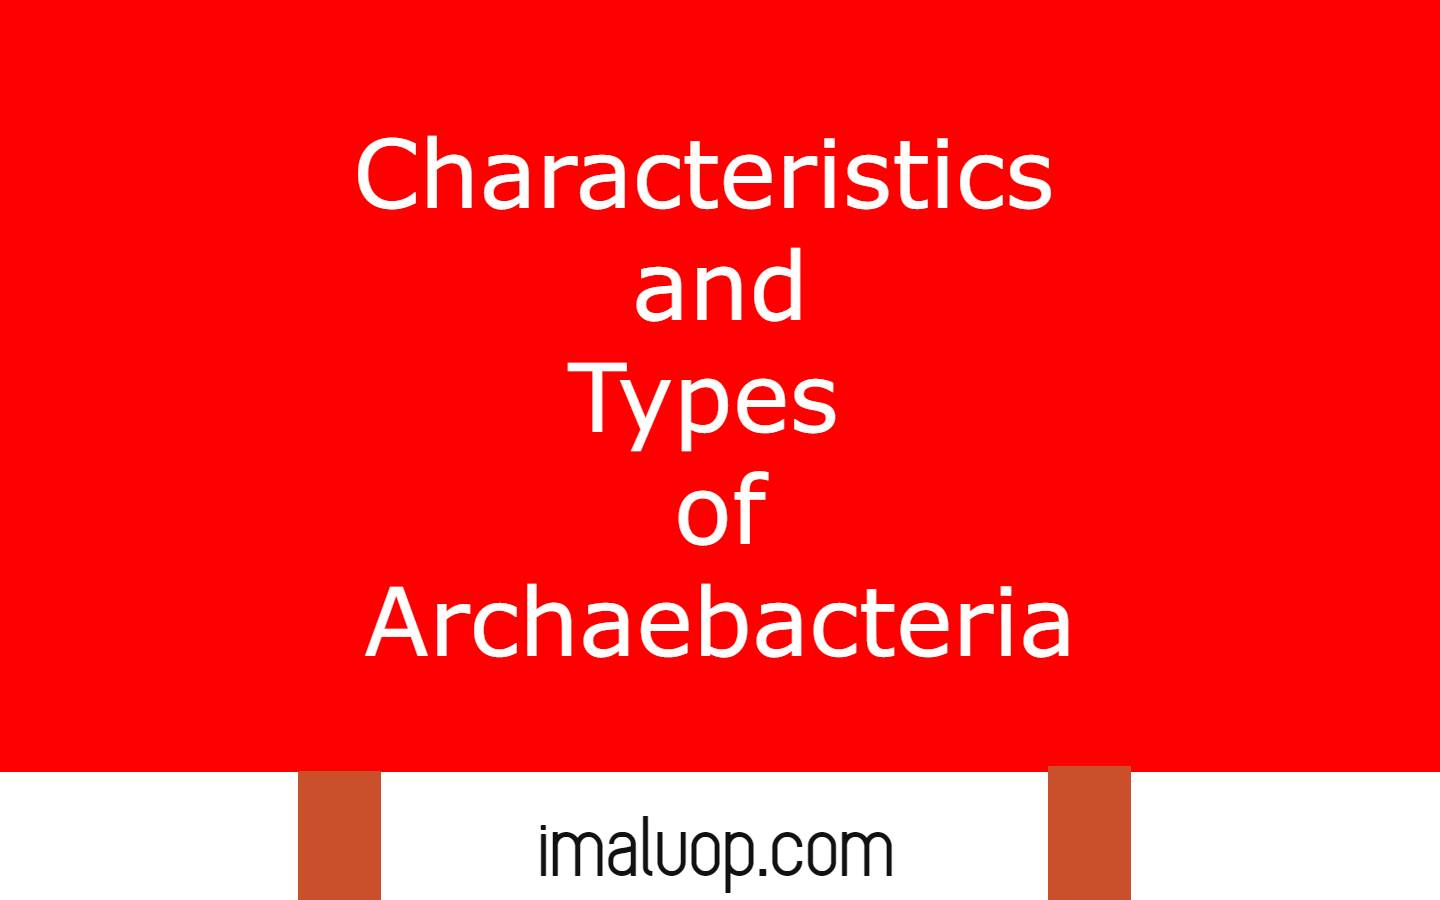 Characteristics and Types of Archaebacteria